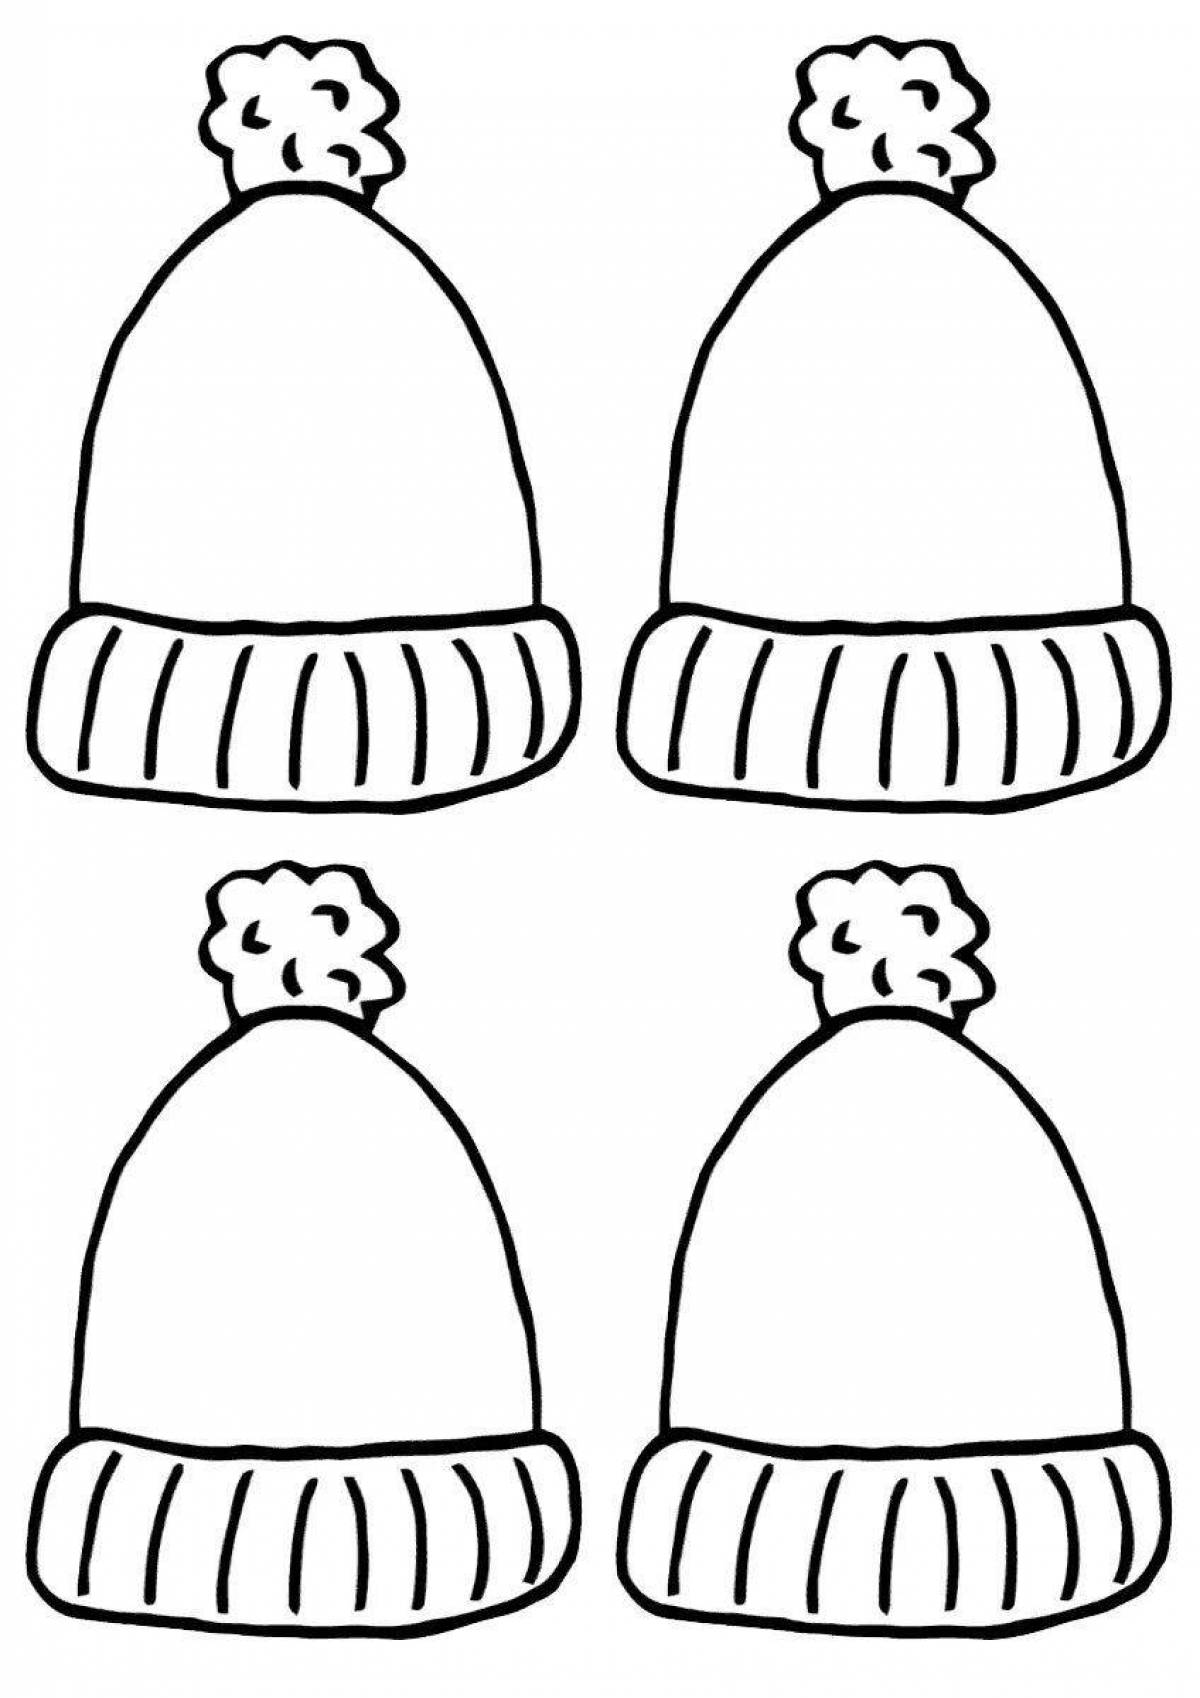 Creative hat coloring book for kids